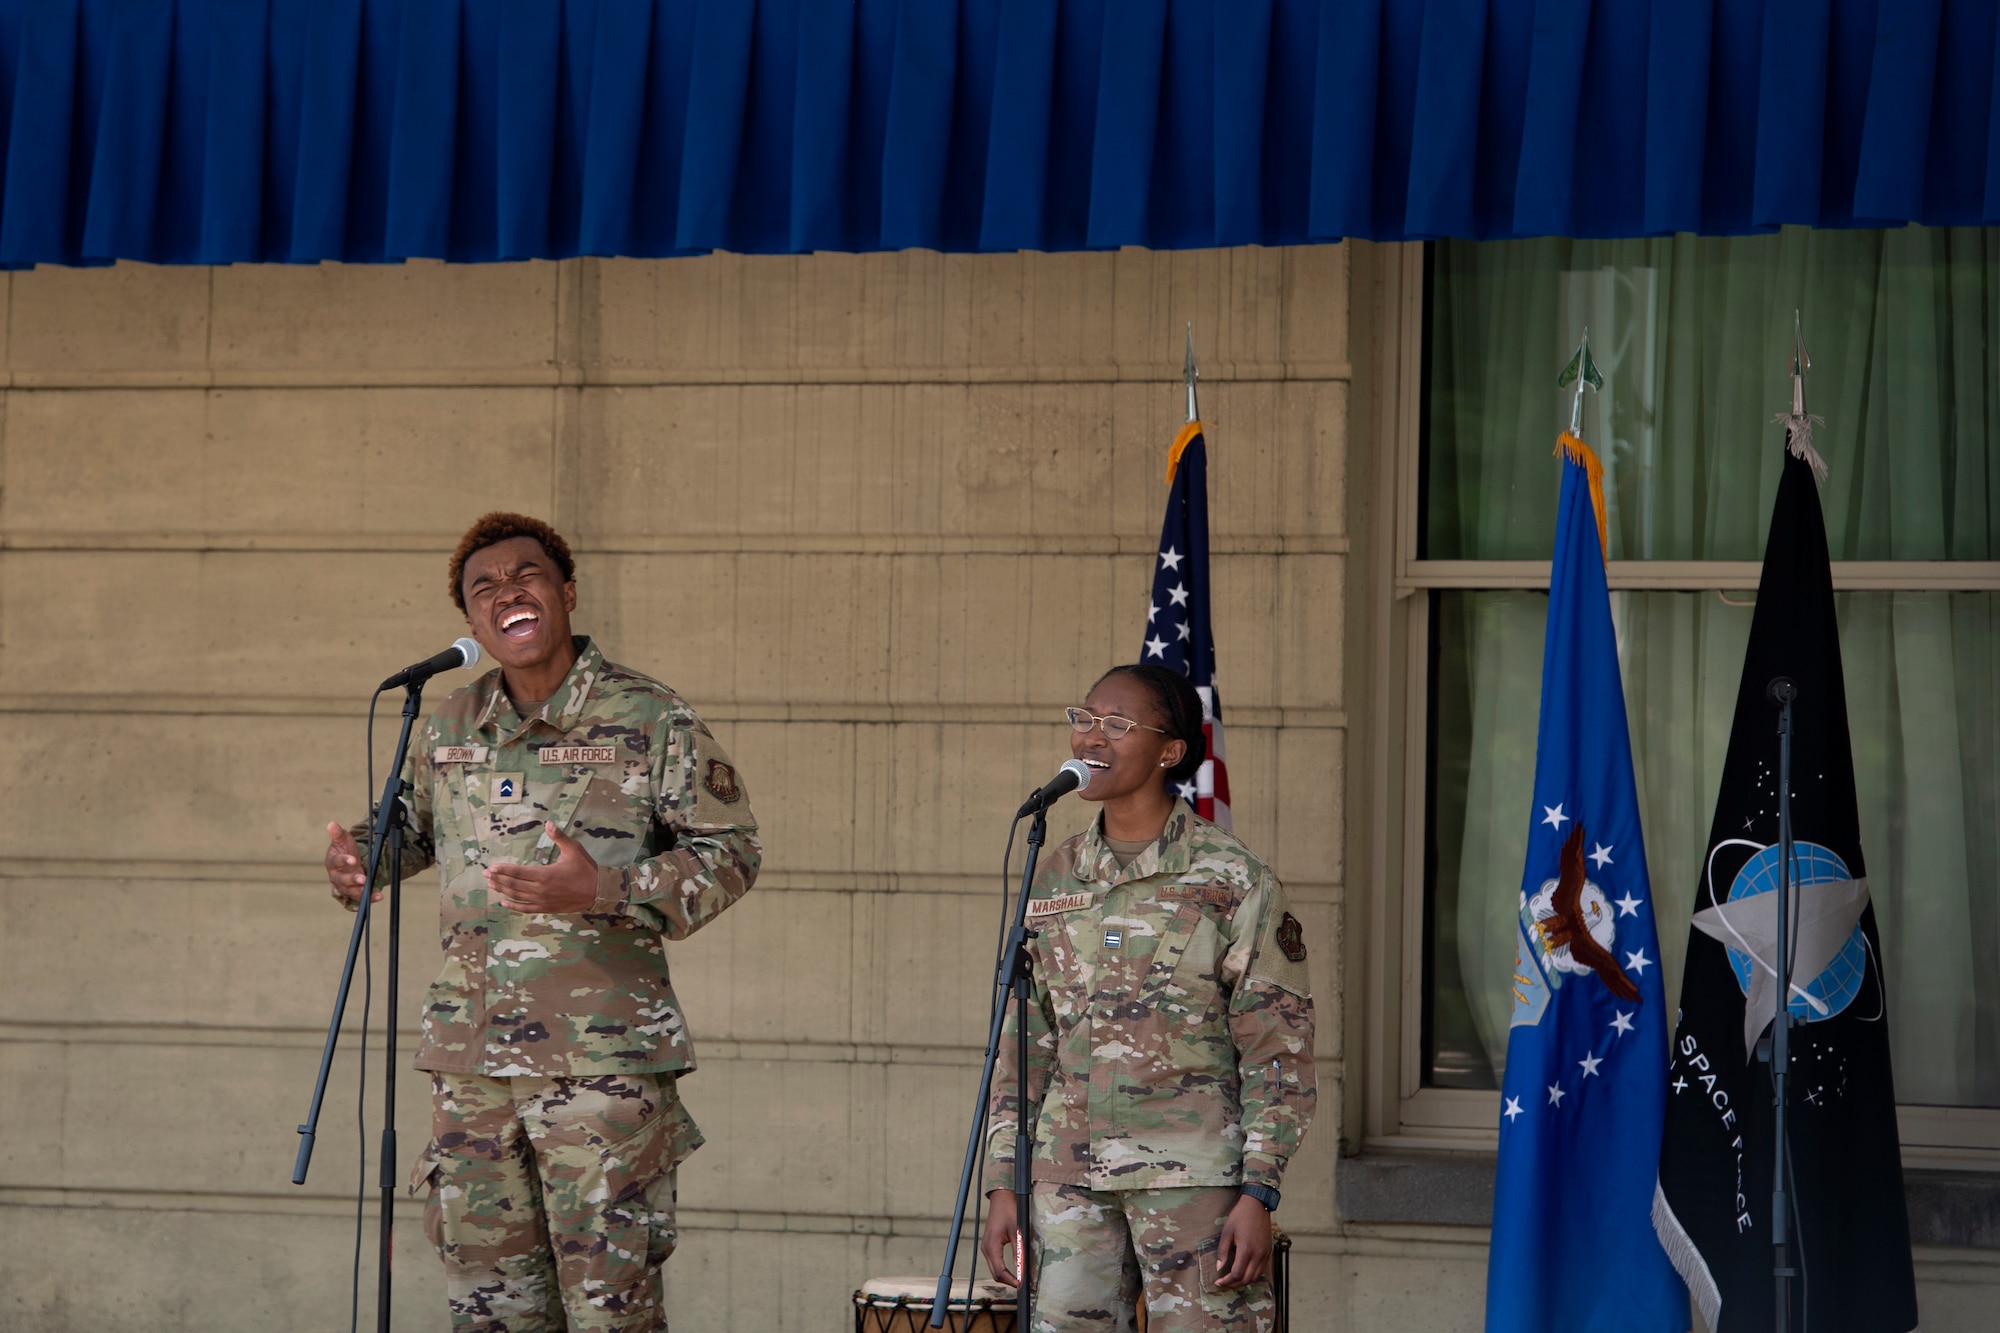 Kolby Brown and Amiah Marshall, Air Force cadets, sing during a Juneteenth Celebration at the Pentagon in Arlington, Va., June 21, 2022. The ceremony included a variety of special performances from Bowie State Gospel Choir, Hampton University Terpsichorean, Farafina Kan West African Percussion and Dance Ensemble, and other individual acts to celebrate Black heritage. (U.S. Air Force photo by Staff Sgt. Elora J. McCutcheon)